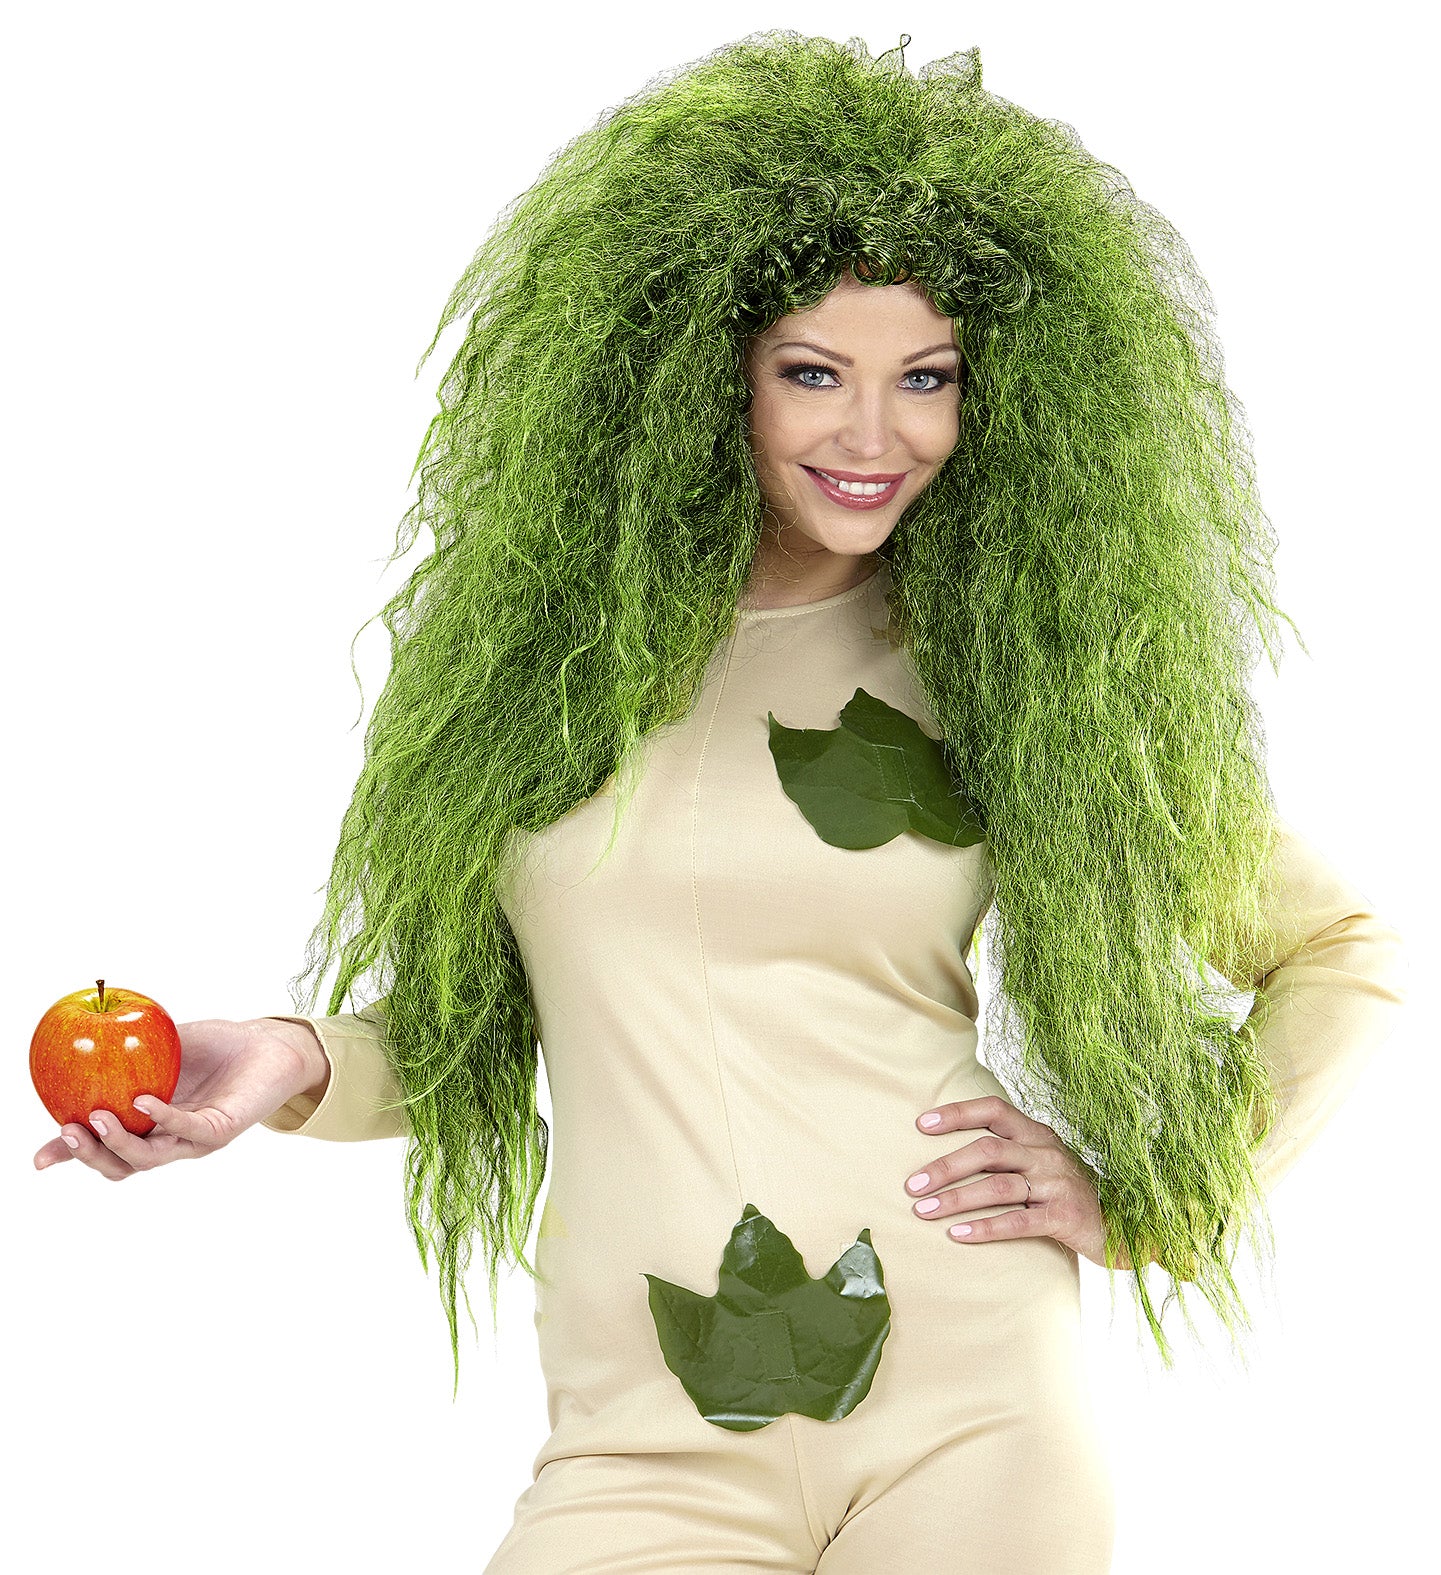 Shaggy green wig for Poison Ivy costume